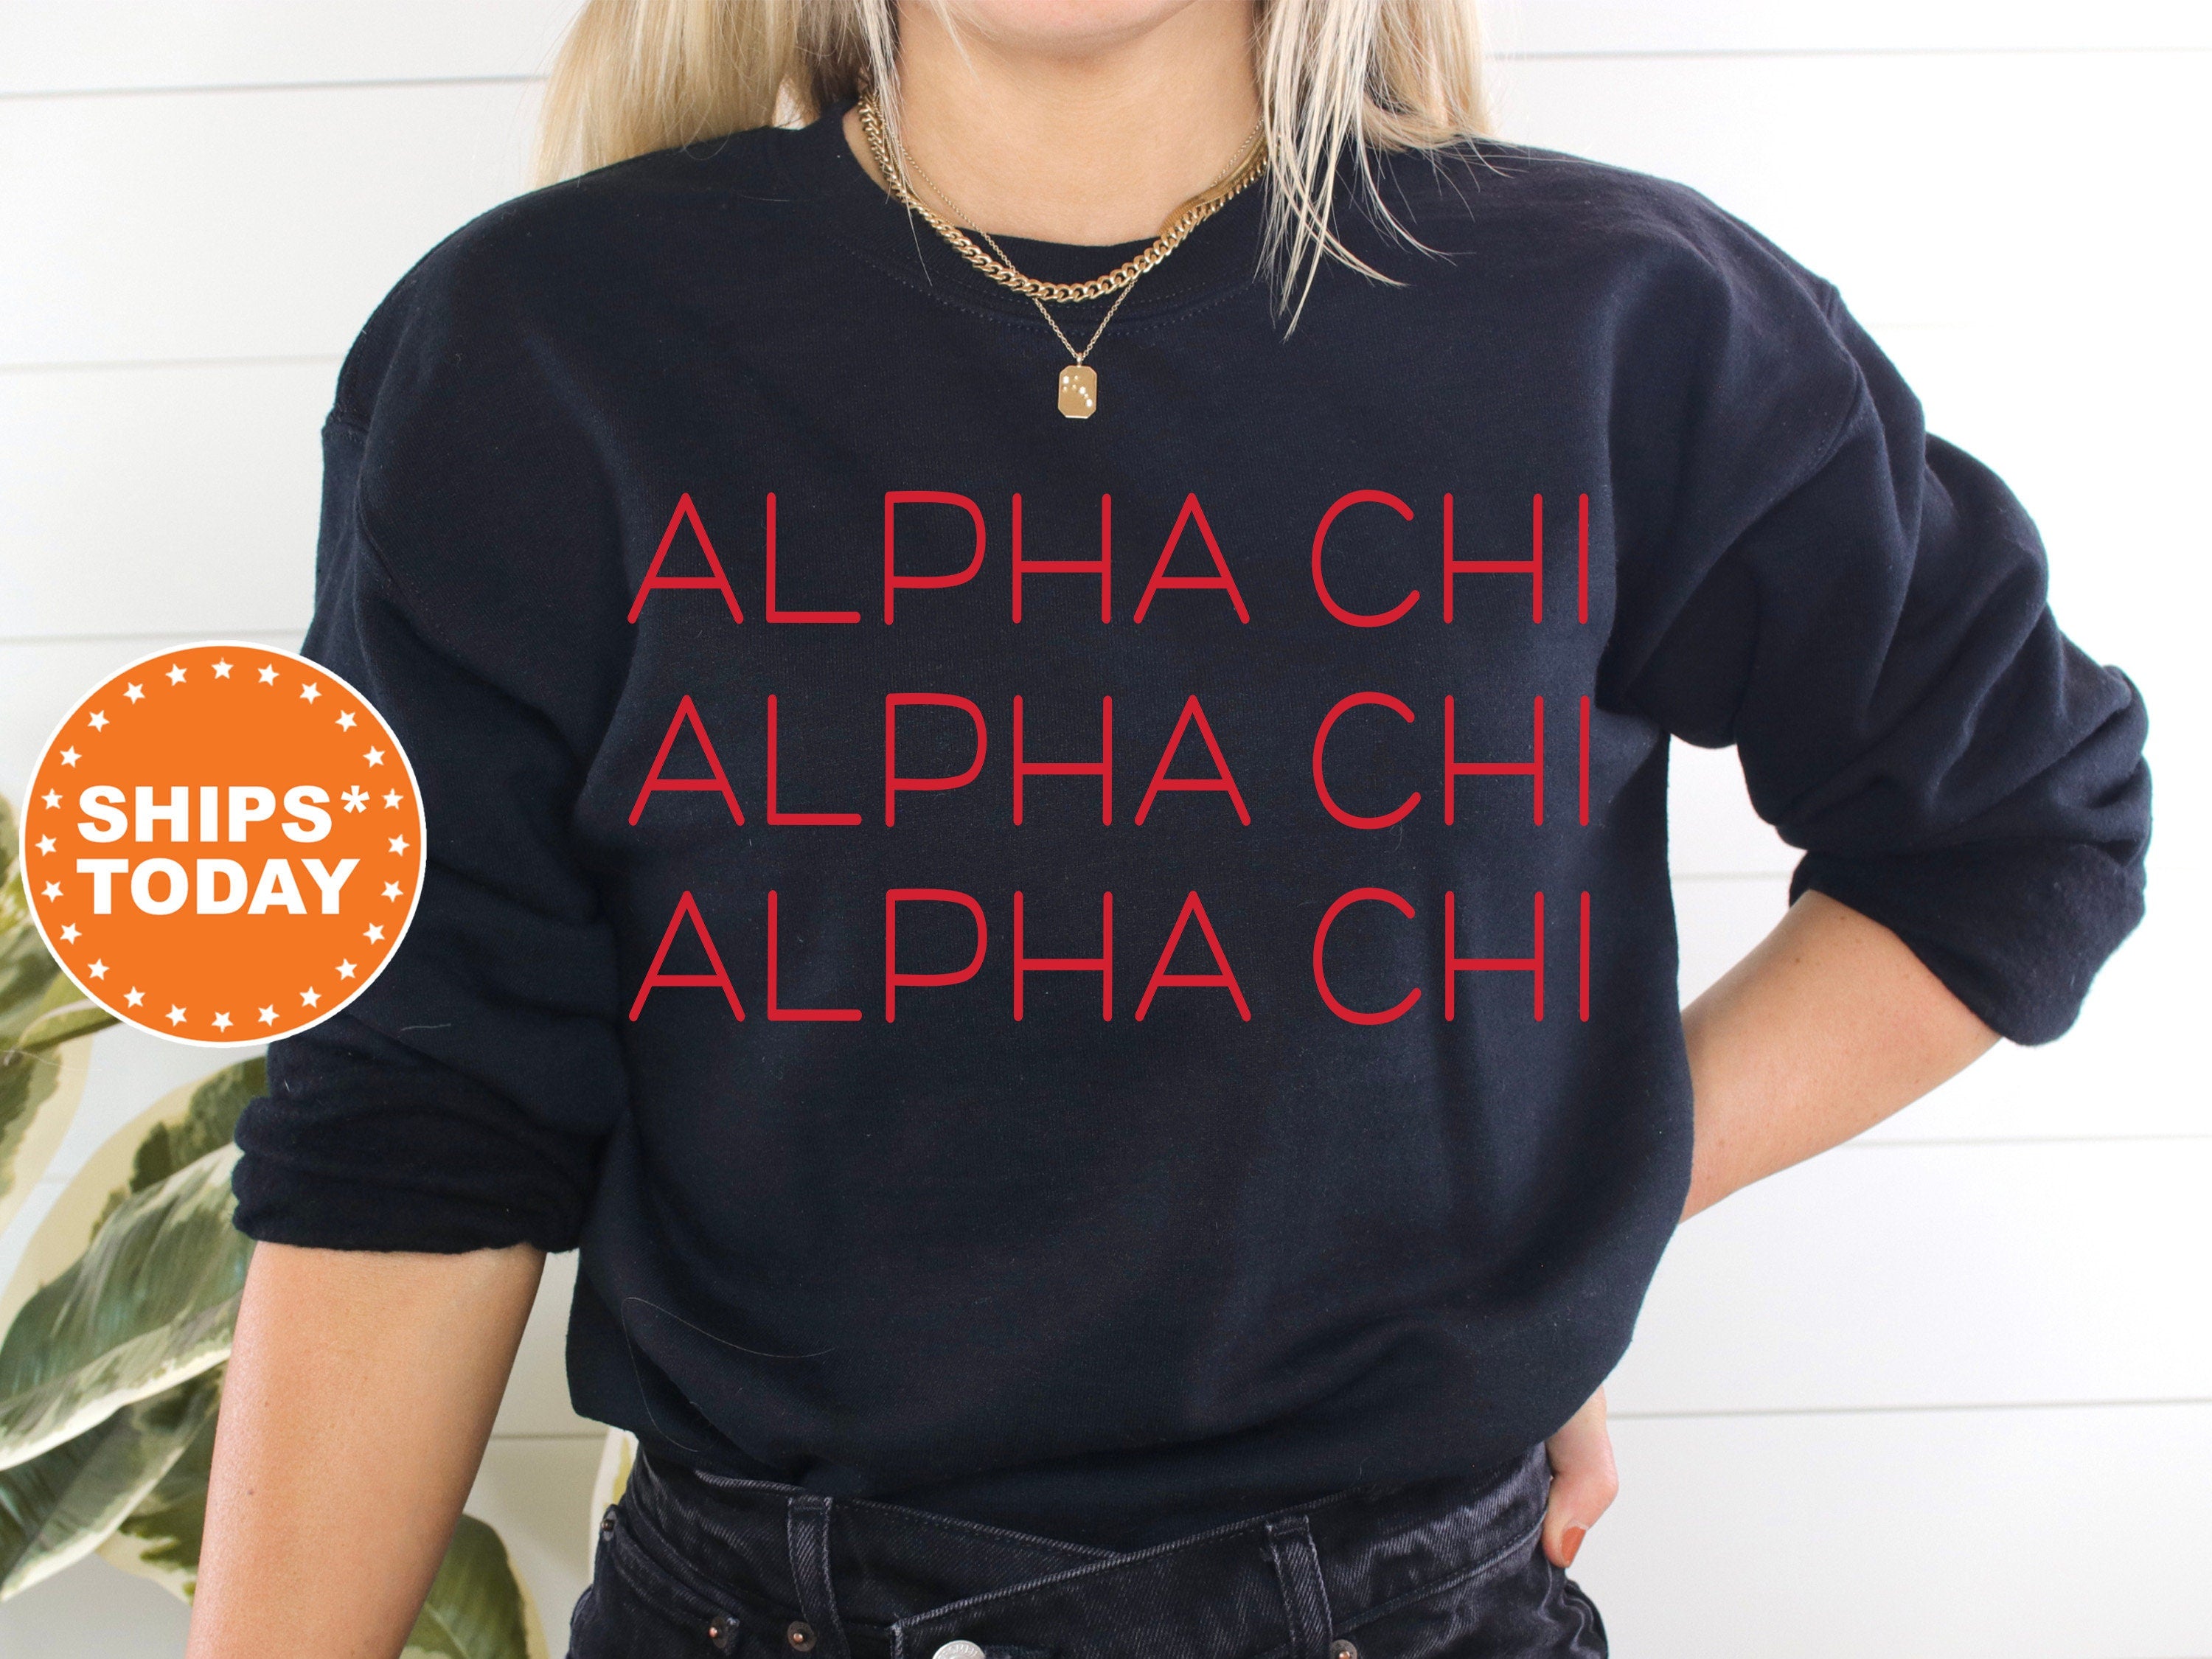 Alpha Chi Omega Red Layered Sorority Sweatshirt | AXO Retro Sweatshirt | ACHIO Greek Sweatshirt | Sorority Apparel | Big Little Gift _ 5740g